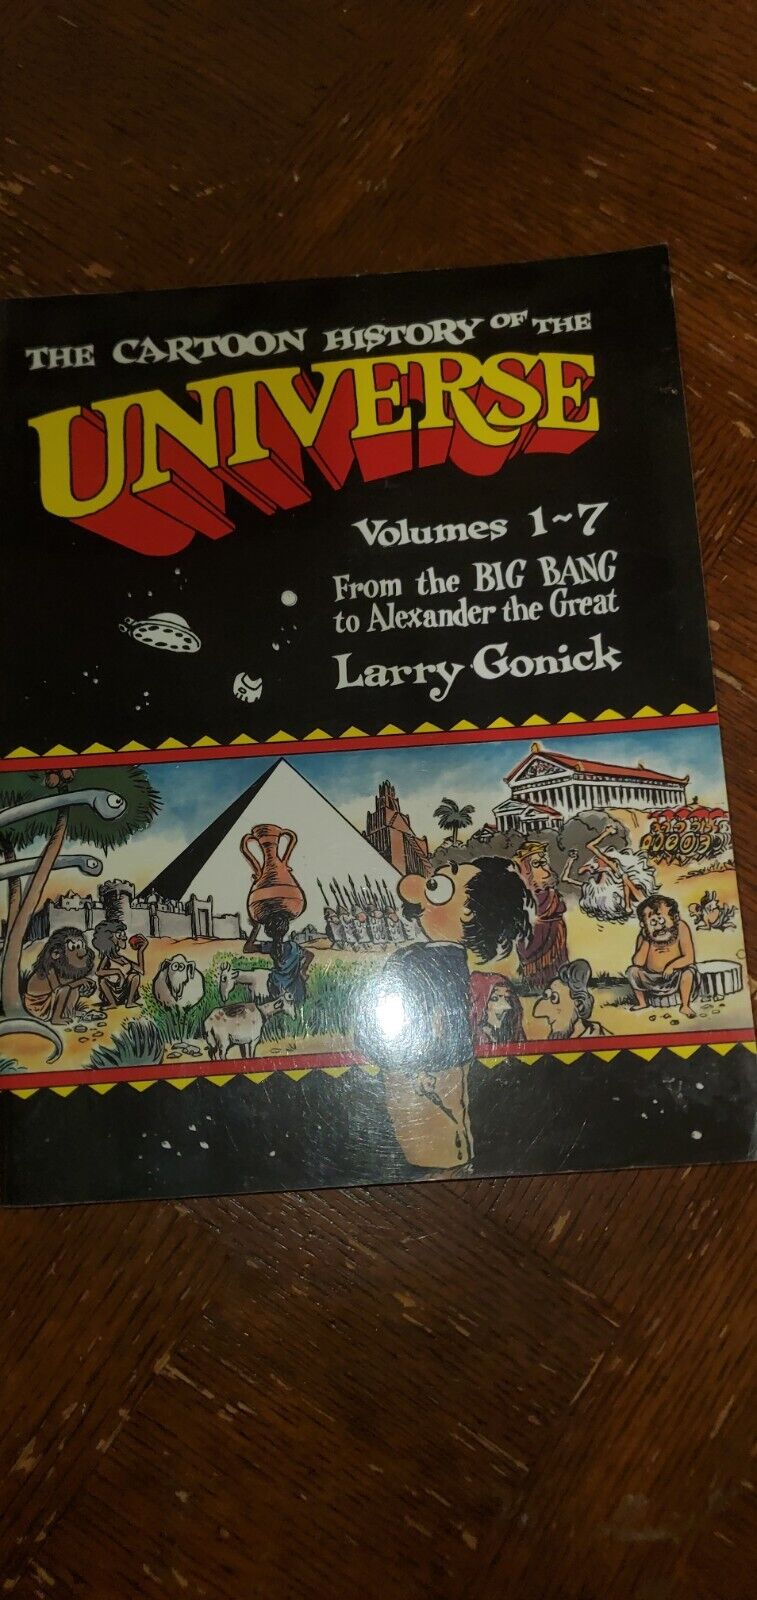 The Cartoon History of the Universe 1990 - Graphic Book Vintage